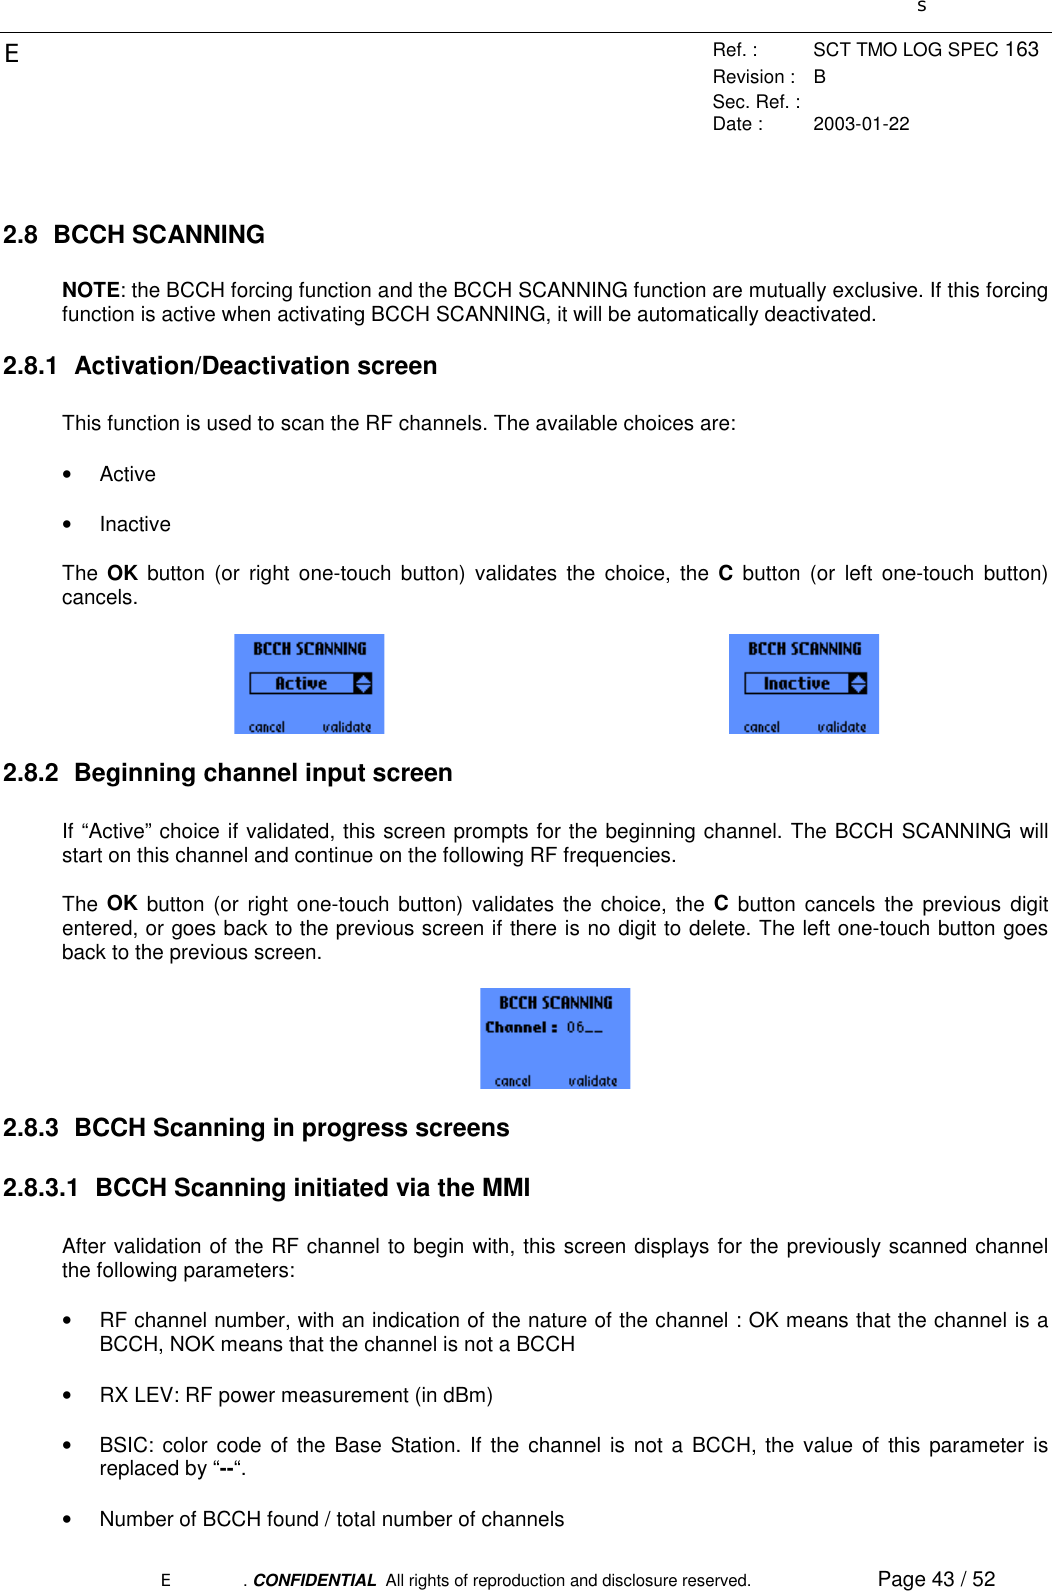 sERef. : SCT TMO LOG SPEC 163Revision : BSec. Ref. :Date : 2003-01-22E. CONFIDENTIAL  All rights of reproduction and disclosure reserved. Page 43 / 522.8 BCCH SCANNINGNOTE: the BCCH forcing function and the BCCH SCANNING function are mutually exclusive. If this forcingfunction is active when activating BCCH SCANNING, it will be automatically deactivated.2.8.1 Activation/Deactivation screenThis function is used to scan the RF channels. The available choices are:• Active• InactiveThe  OK button (or right one-touch button) validates the choice, the C button (or left one-touch button)cancels.2.8.2  Beginning channel input screenIf “Active” choice if validated, this screen prompts for the beginning channel. The BCCH SCANNING willstart on this channel and continue on the following RF frequencies.The  OK button (or right one-touch button) validates the choice, the C button cancels the previous digitentered, or goes back to the previous screen if there is no digit to delete. The left one-touch button goesback to the previous screen.2.8.3  BCCH Scanning in progress screens2.8.3.1  BCCH Scanning initiated via the MMIAfter validation of the RF channel to begin with, this screen displays for the previously scanned channelthe following parameters:•  RF channel number, with an indication of the nature of the channel : OK means that the channel is aBCCH, NOK means that the channel is not a BCCH•  RX LEV: RF power measurement (in dBm)•  BSIC: color code of the Base Station. If the channel is not a BCCH, the value of this parameter isreplaced by “--“.•  Number of BCCH found / total number of channels